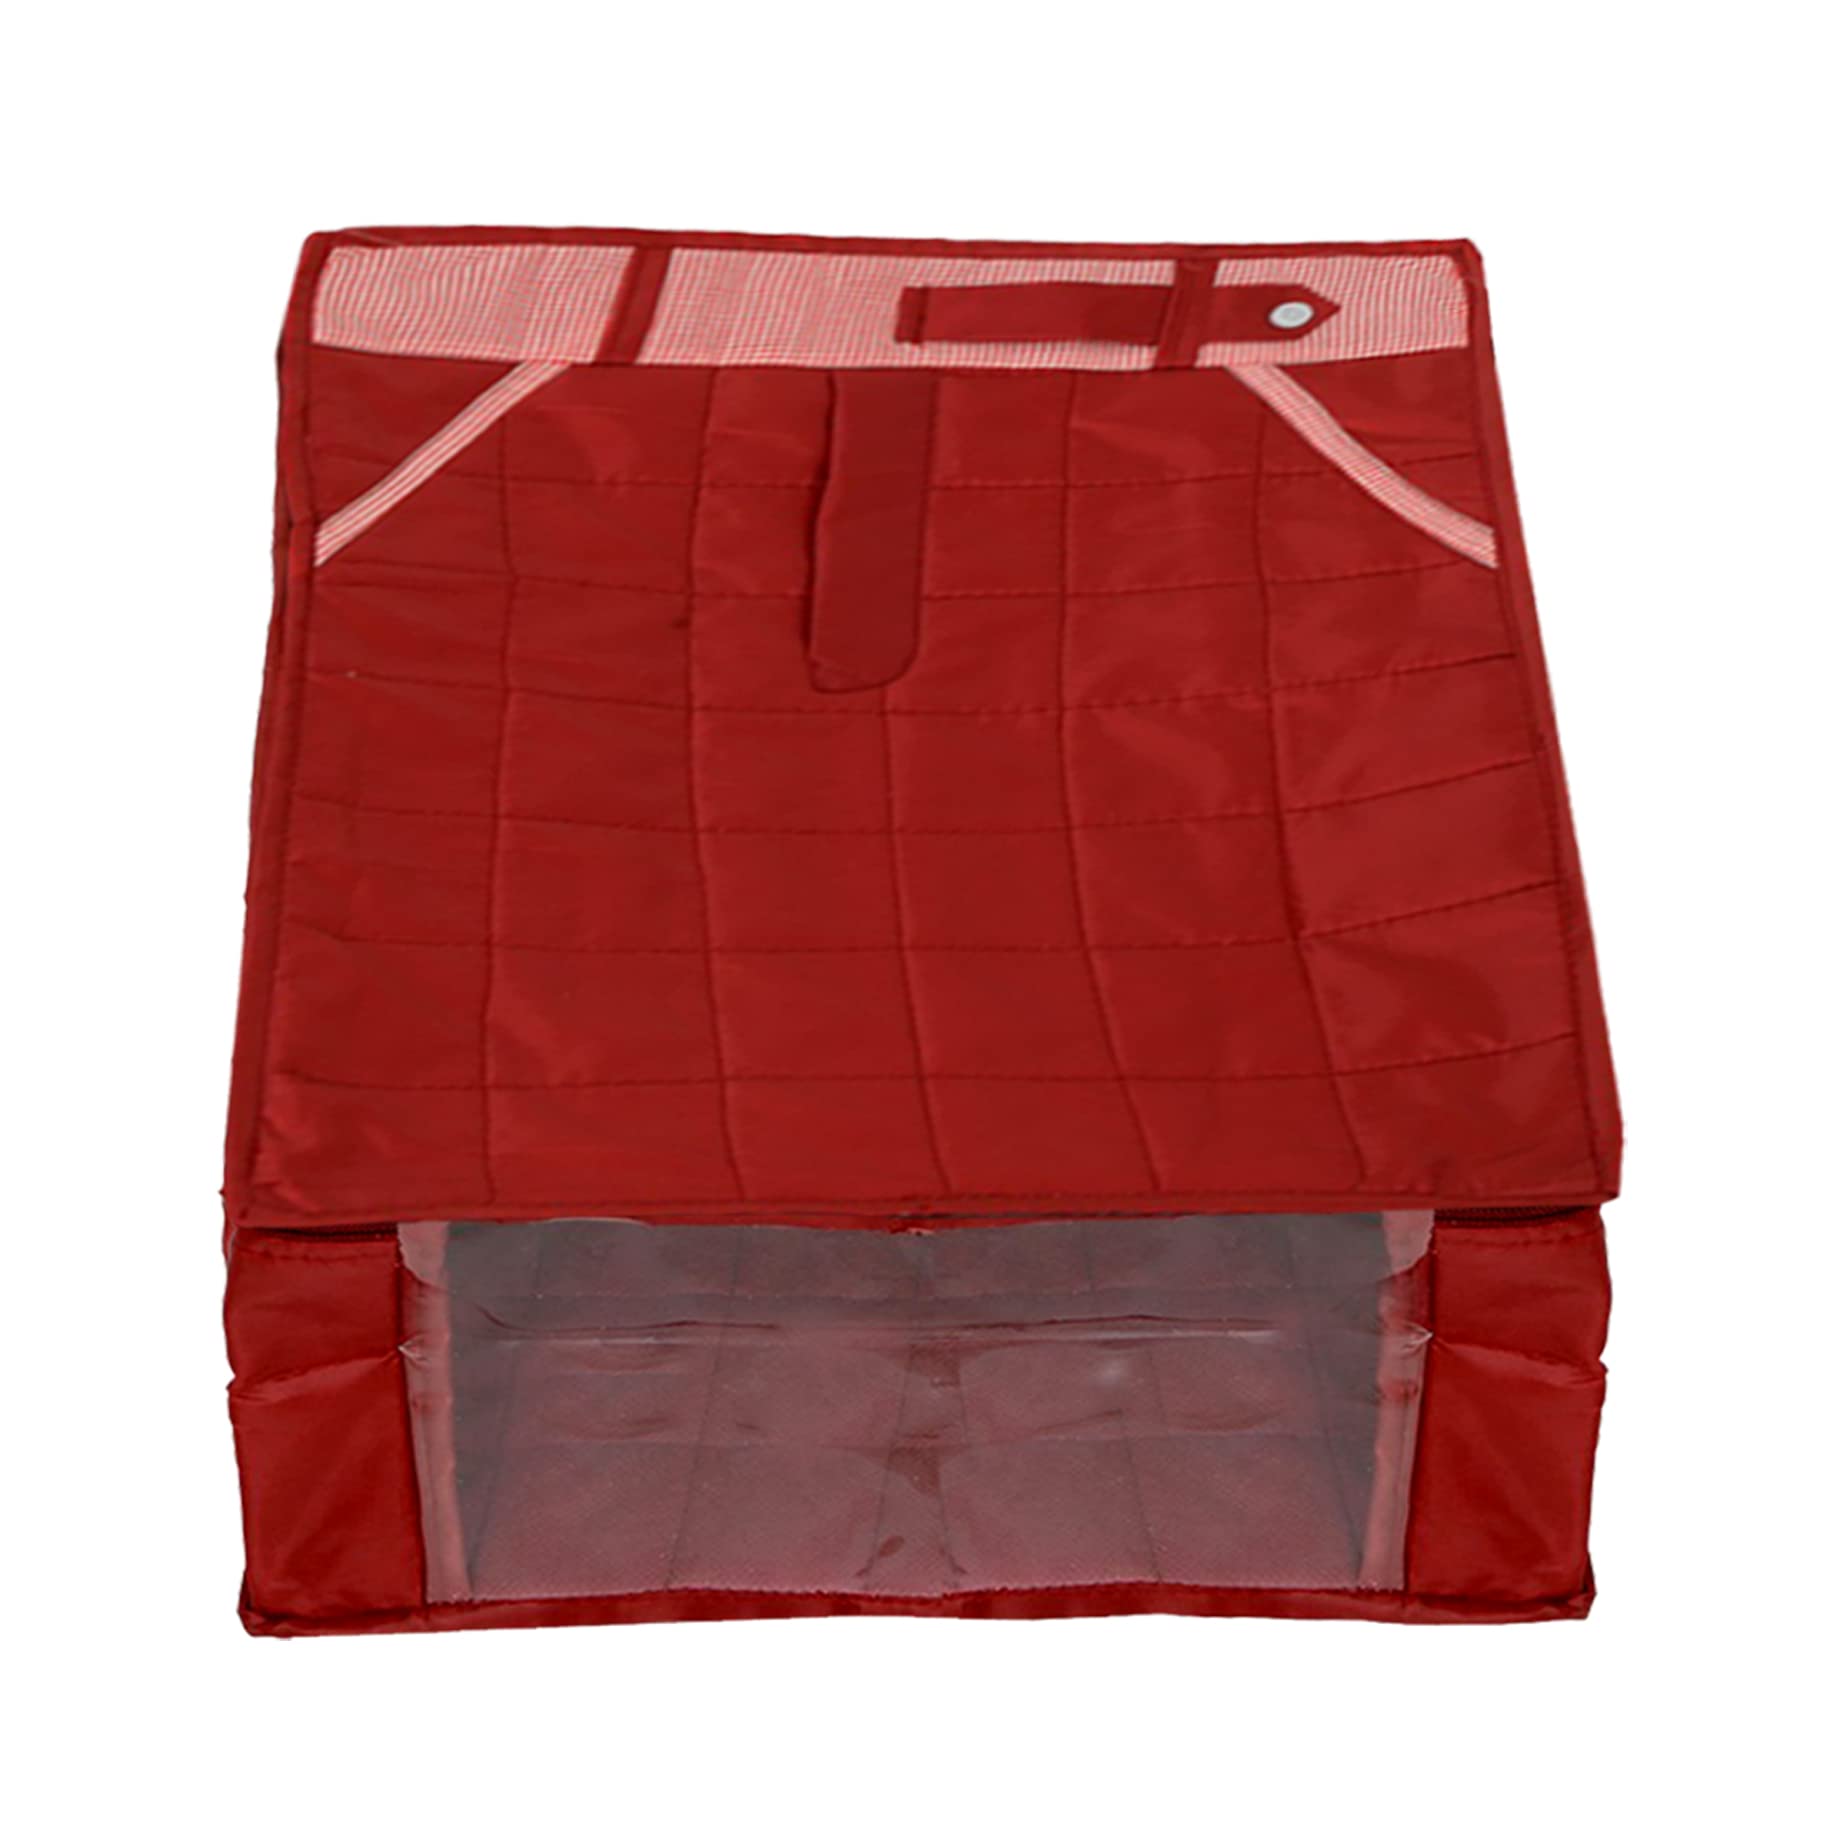 Kuber Industries Pant/Trouser Cum Clothes Organizer With Clear Window- Pack of 2 (Maroon)-HS_38_KUBMART21202